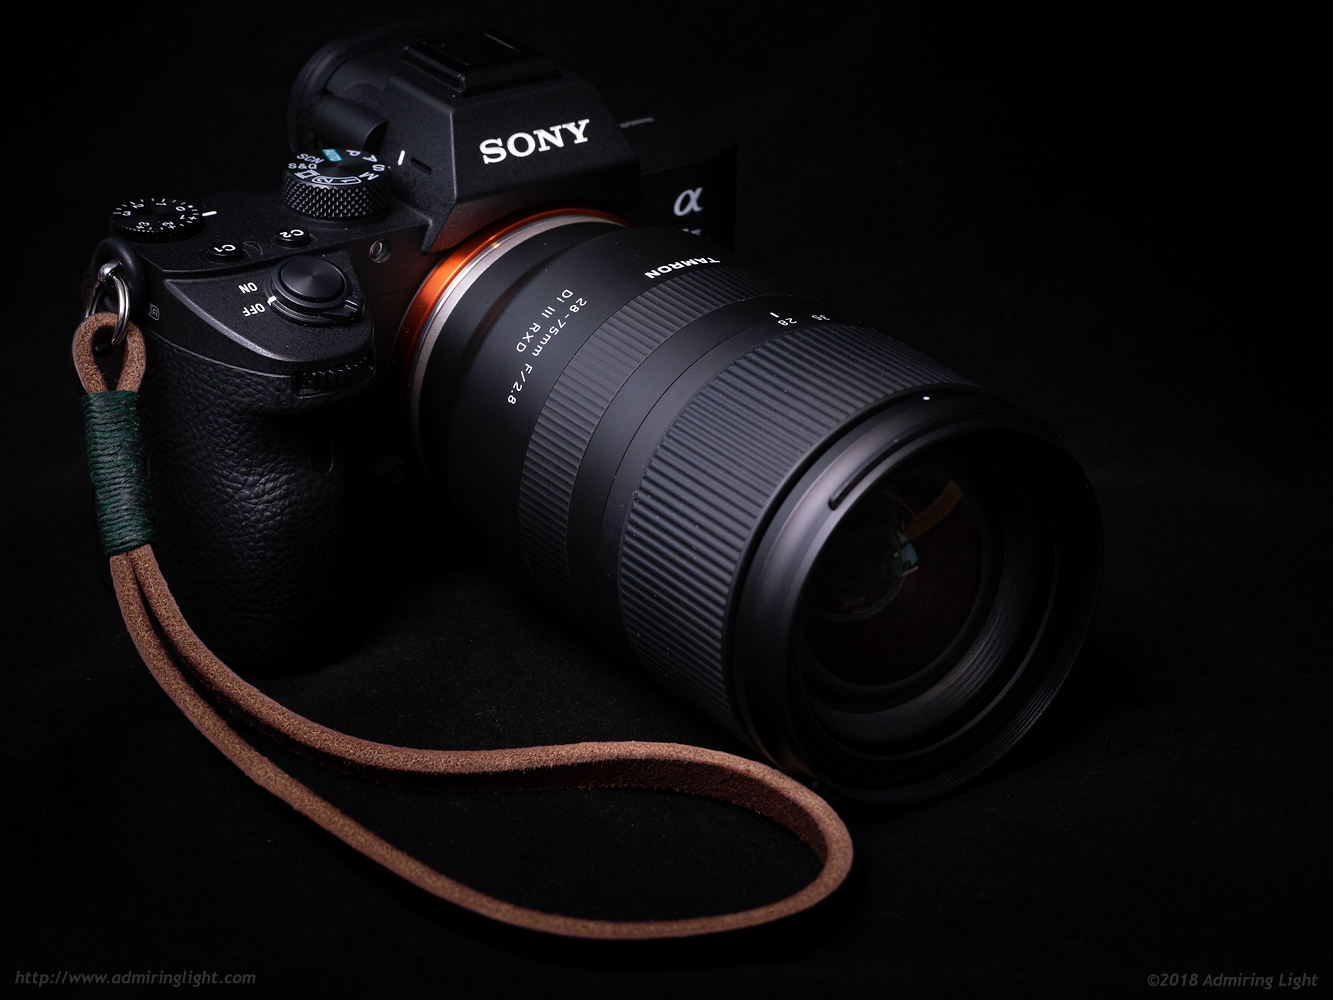 Review: Tamron 28-75mm f/2.8 Di III RXD (Sony E-Mount) - Admiring